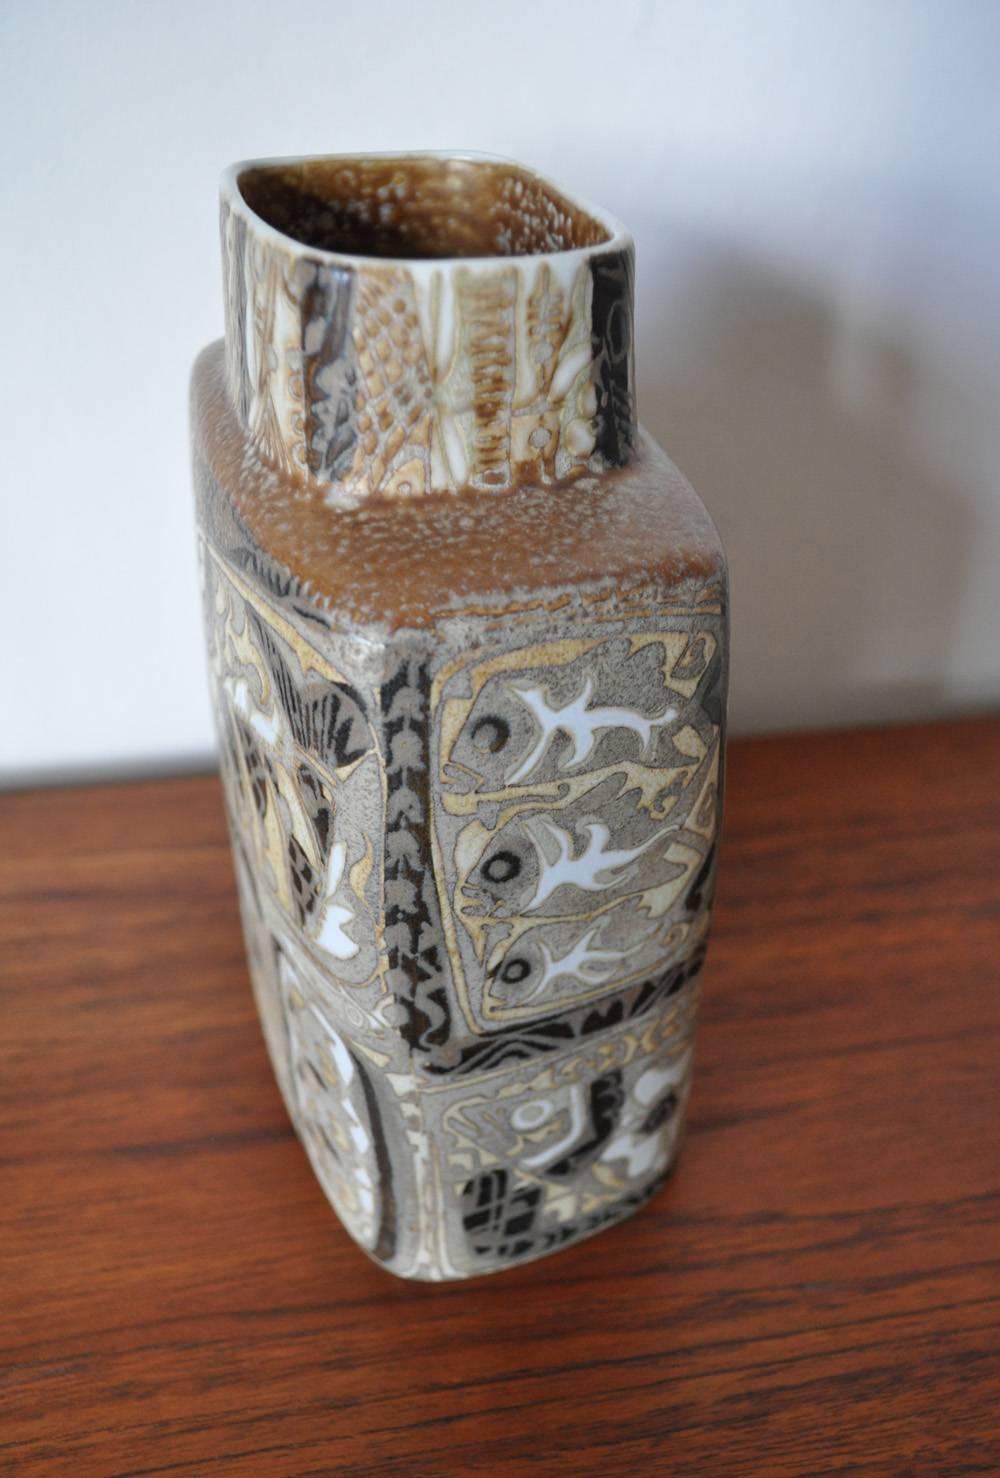 Baca fajance/ceramic vase designed by Nils Thorsson (1989-1975) and produced in 1960s at Royal Copenhagen, Denmark. 
Complexed and detailed patterns which in creation from Scandinavia have become Mid Century iconic fajance. 
Stamped with Nils